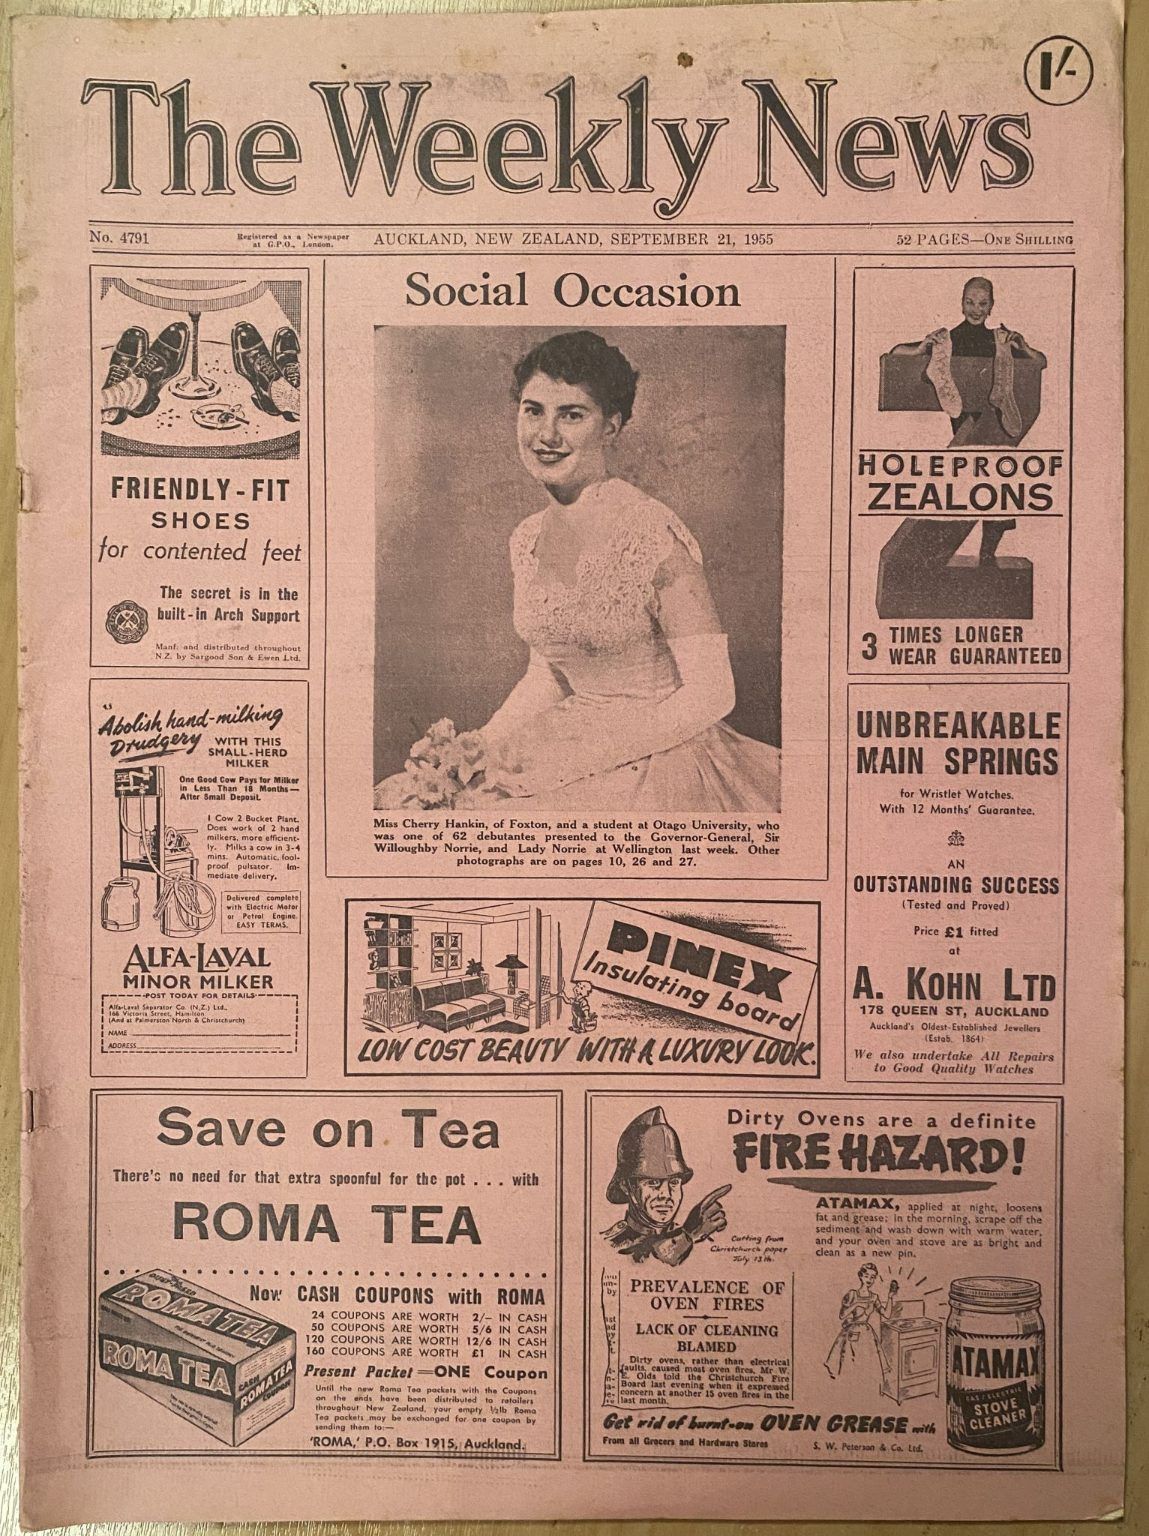 OLD NEWSPAPER: The Weekly News - No. 4791, 21 September 1955